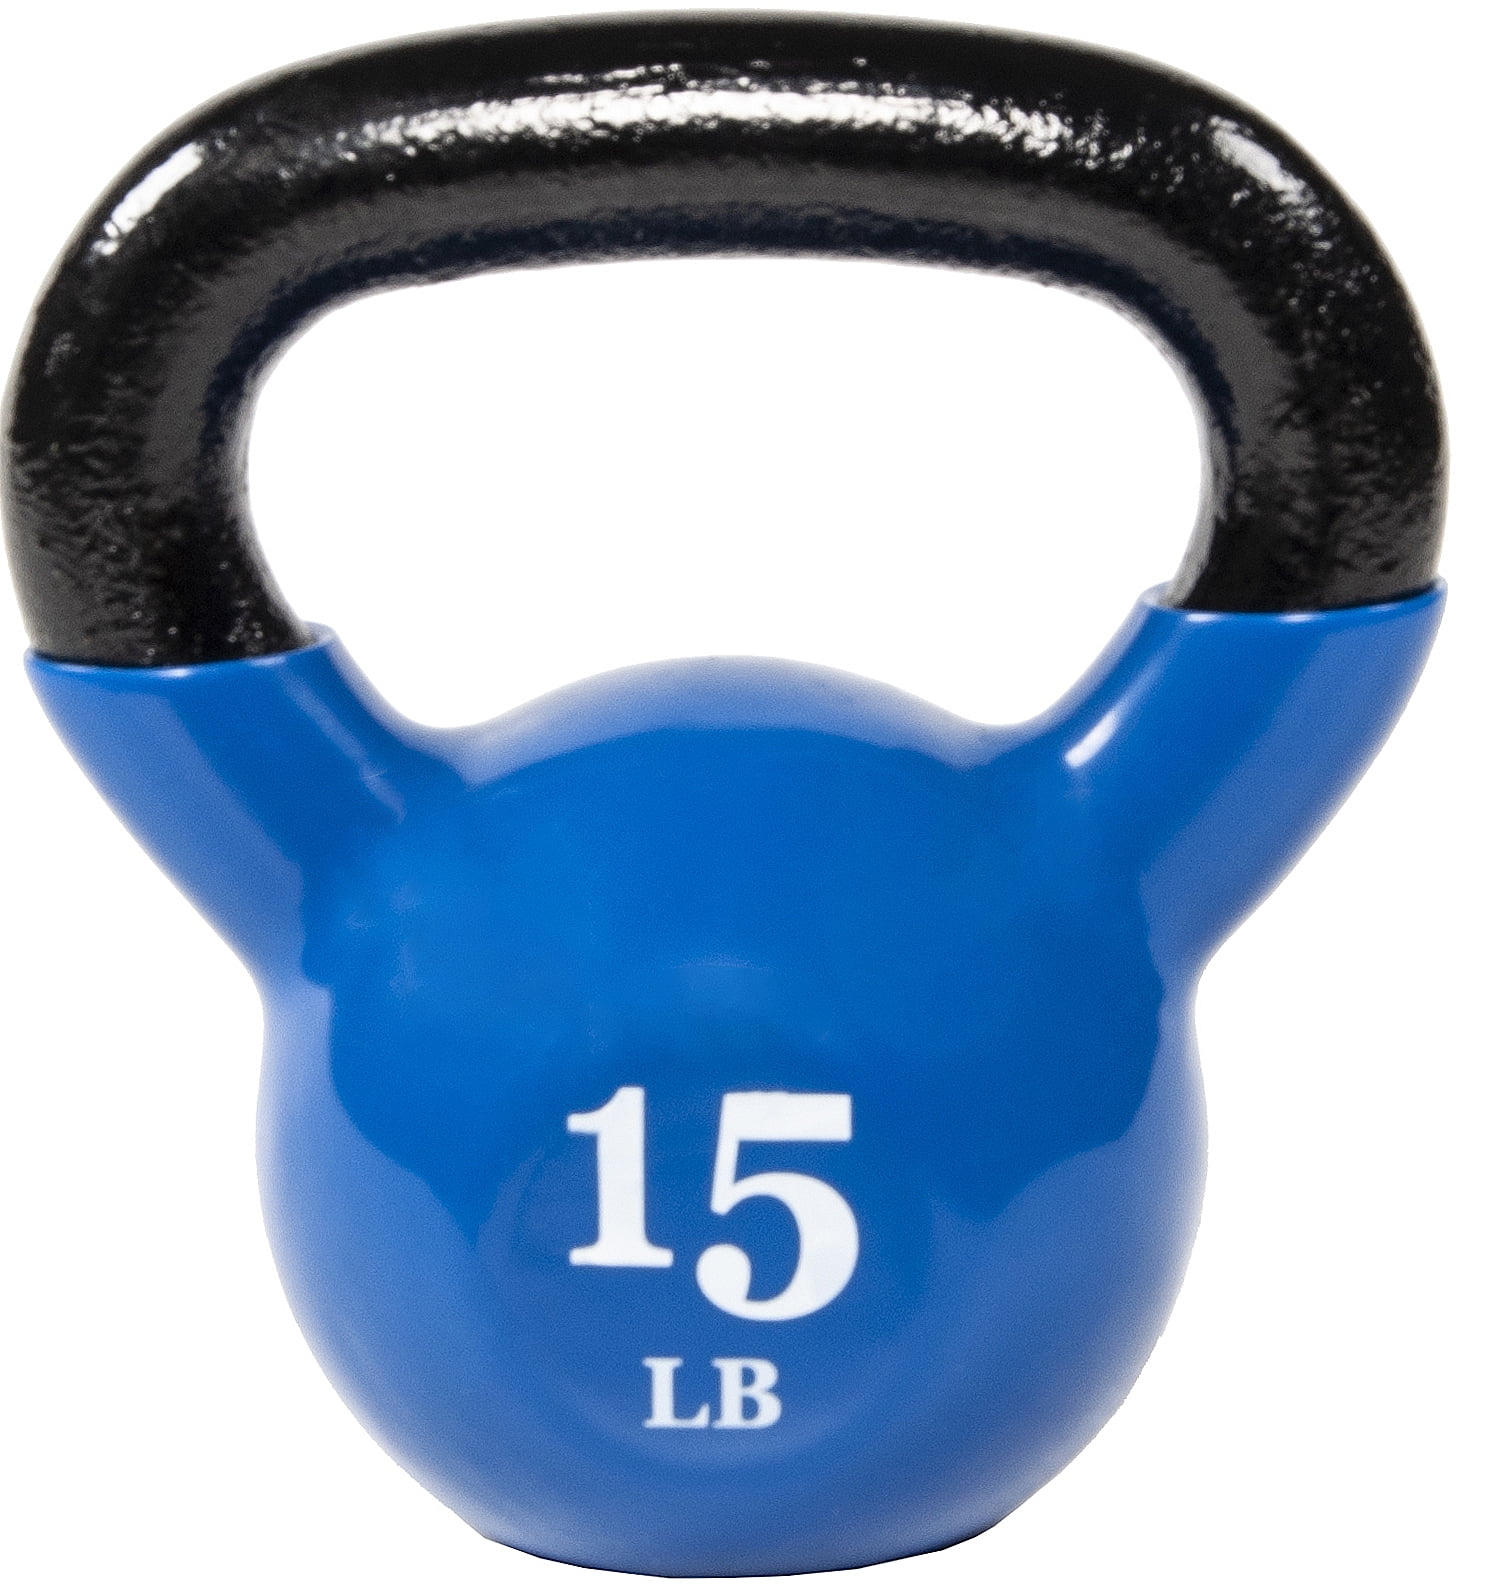 All-Purpose Color Vinyl Coated Kettlebells Multi Weights and Colors New 